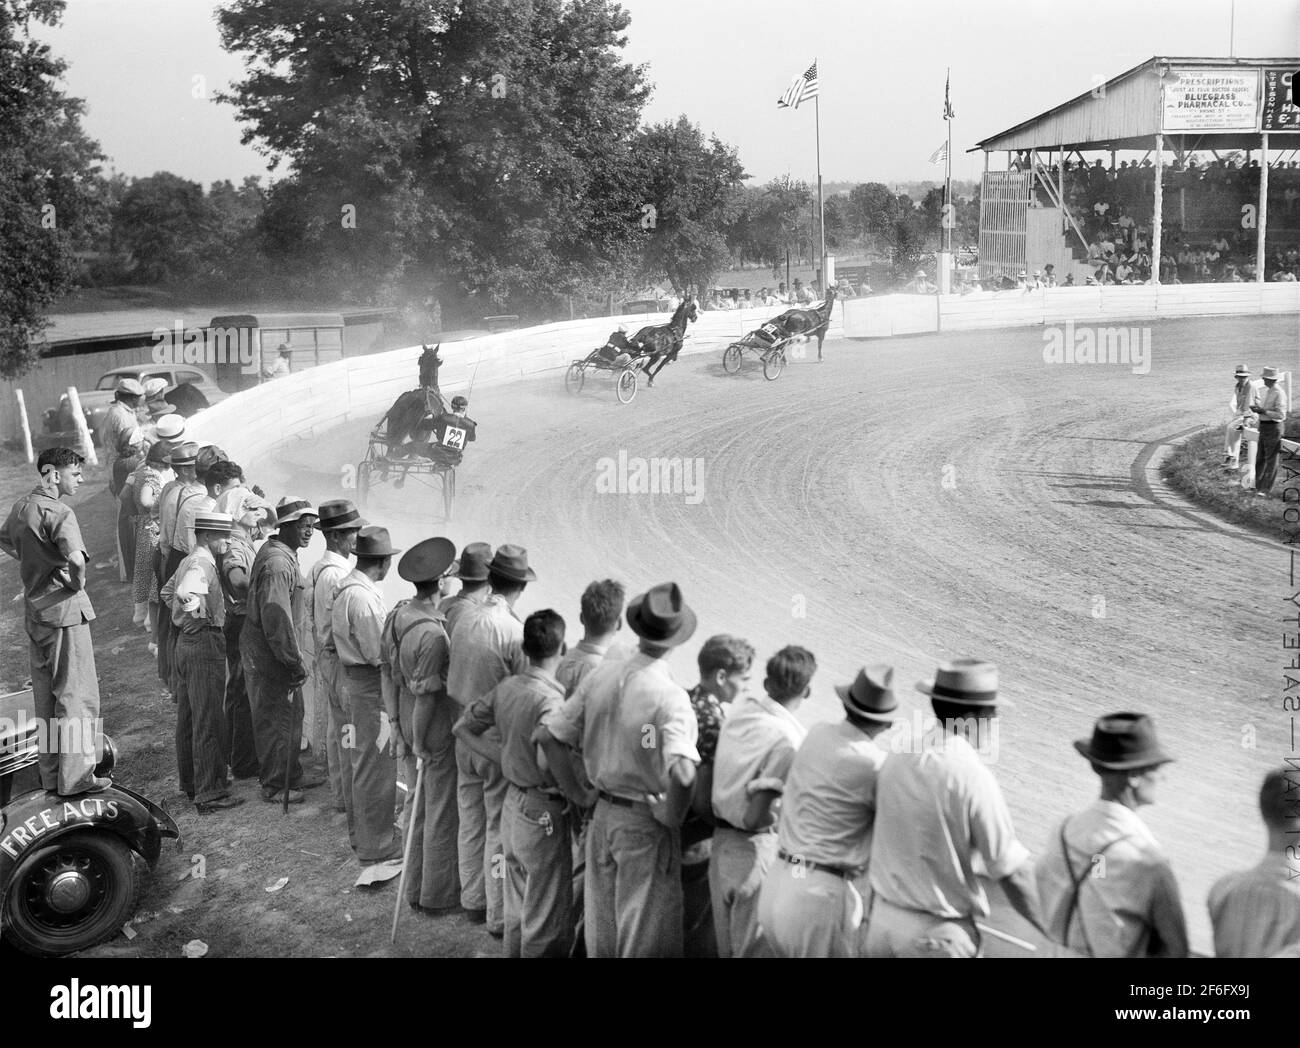 Sulky or Harness Races, Shelby County Fair, Shelbyville, Kentucky, Stati Uniti, Marion Post Wolcott, U.S. Farm Security Administration, agosto 1940 Foto Stock